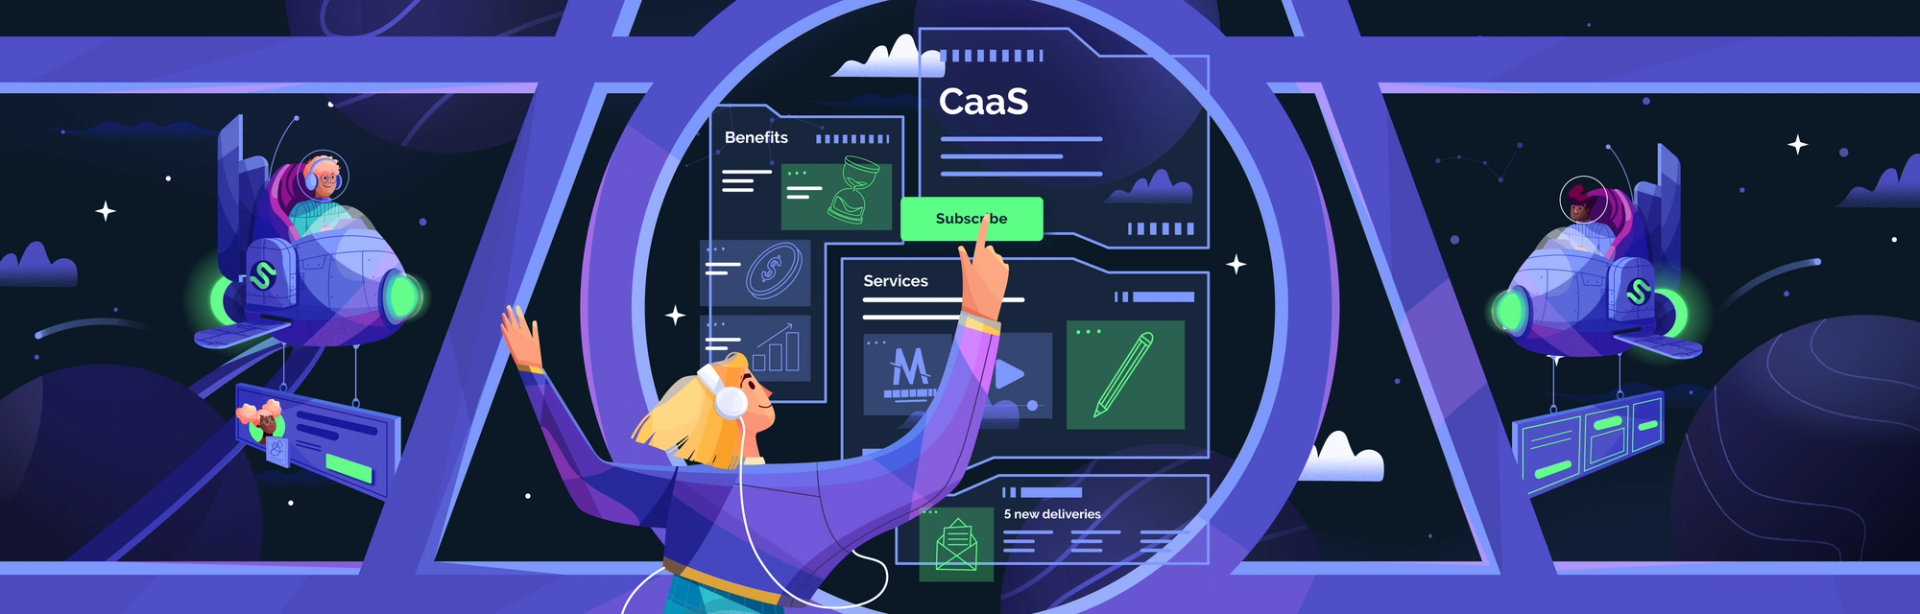 What is Creative as a Service (CaaS)? - Superside